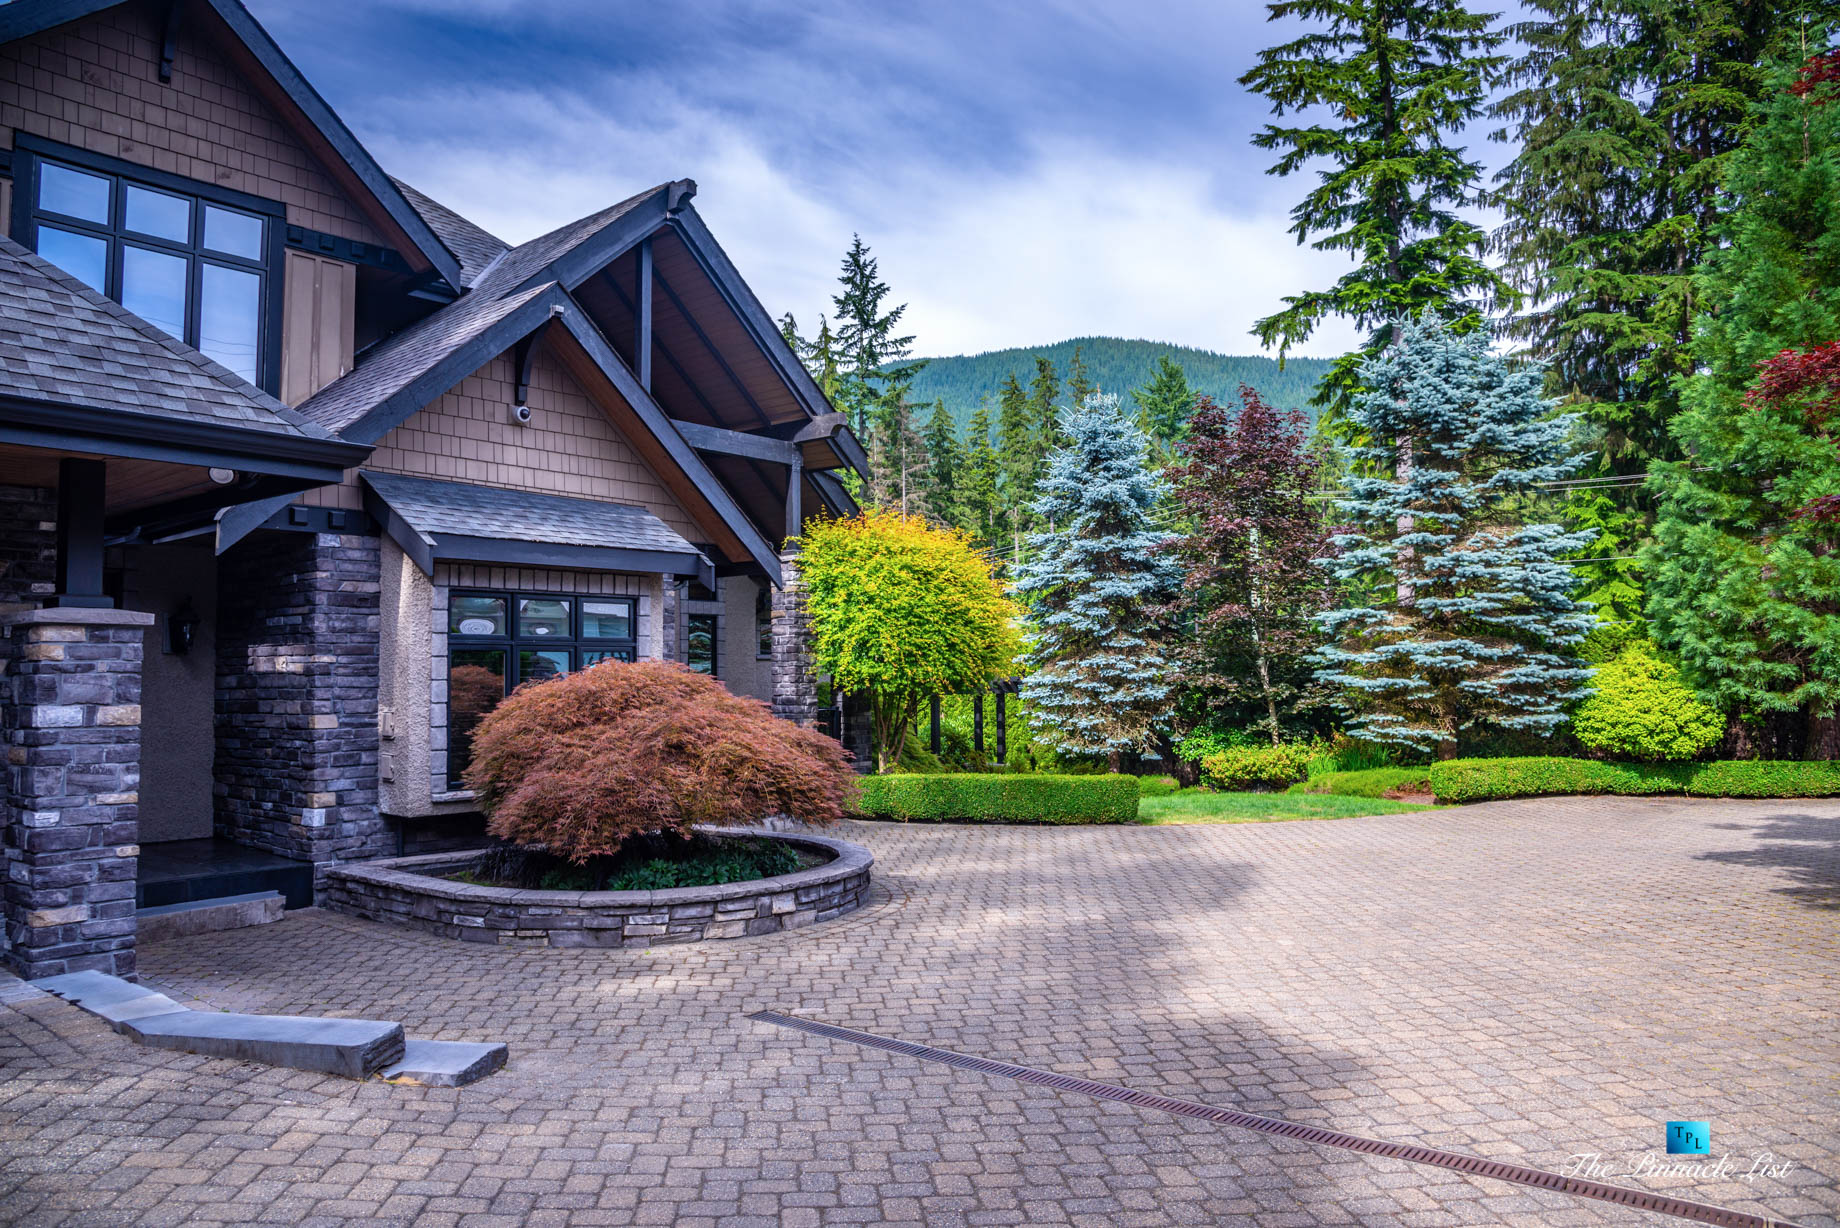 3053 Anmore Creek Way, Anmore, BC, Canada - House Front Driveway View - Luxury Real Estate - Greater Vancouver Home